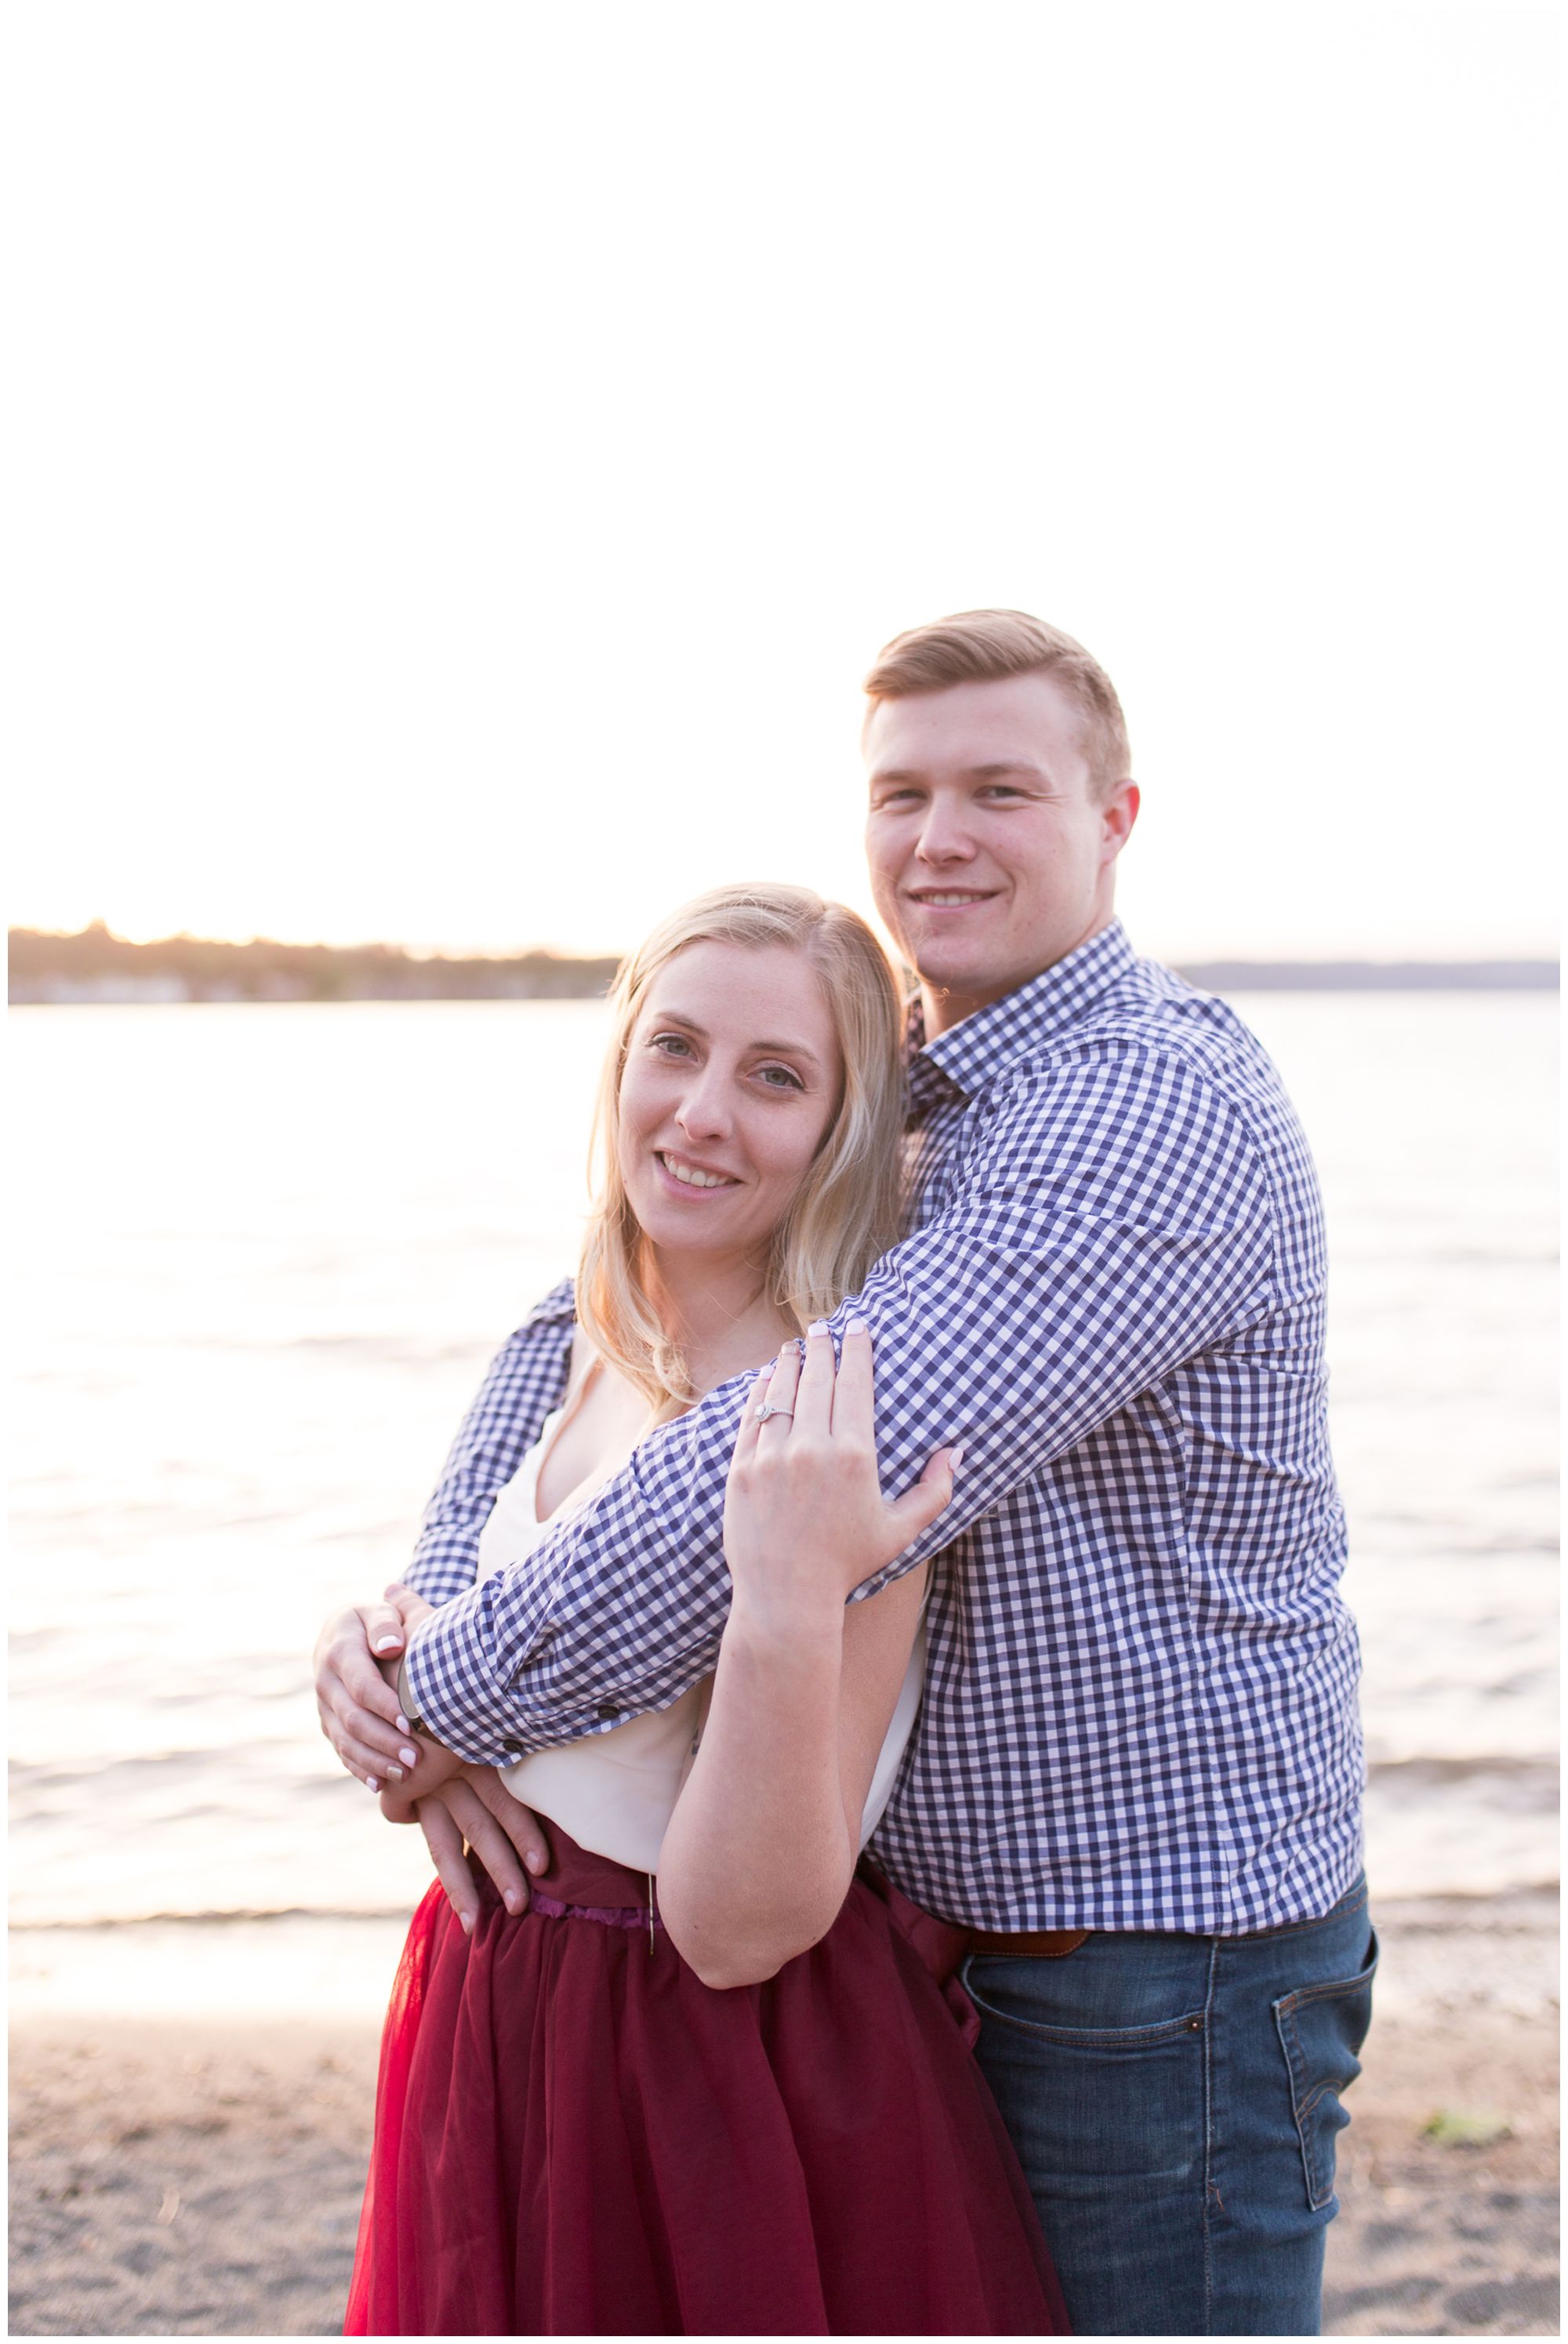 Issaquah WA engagement session at Lake Sammamish State Park // Autumn Howell Photography